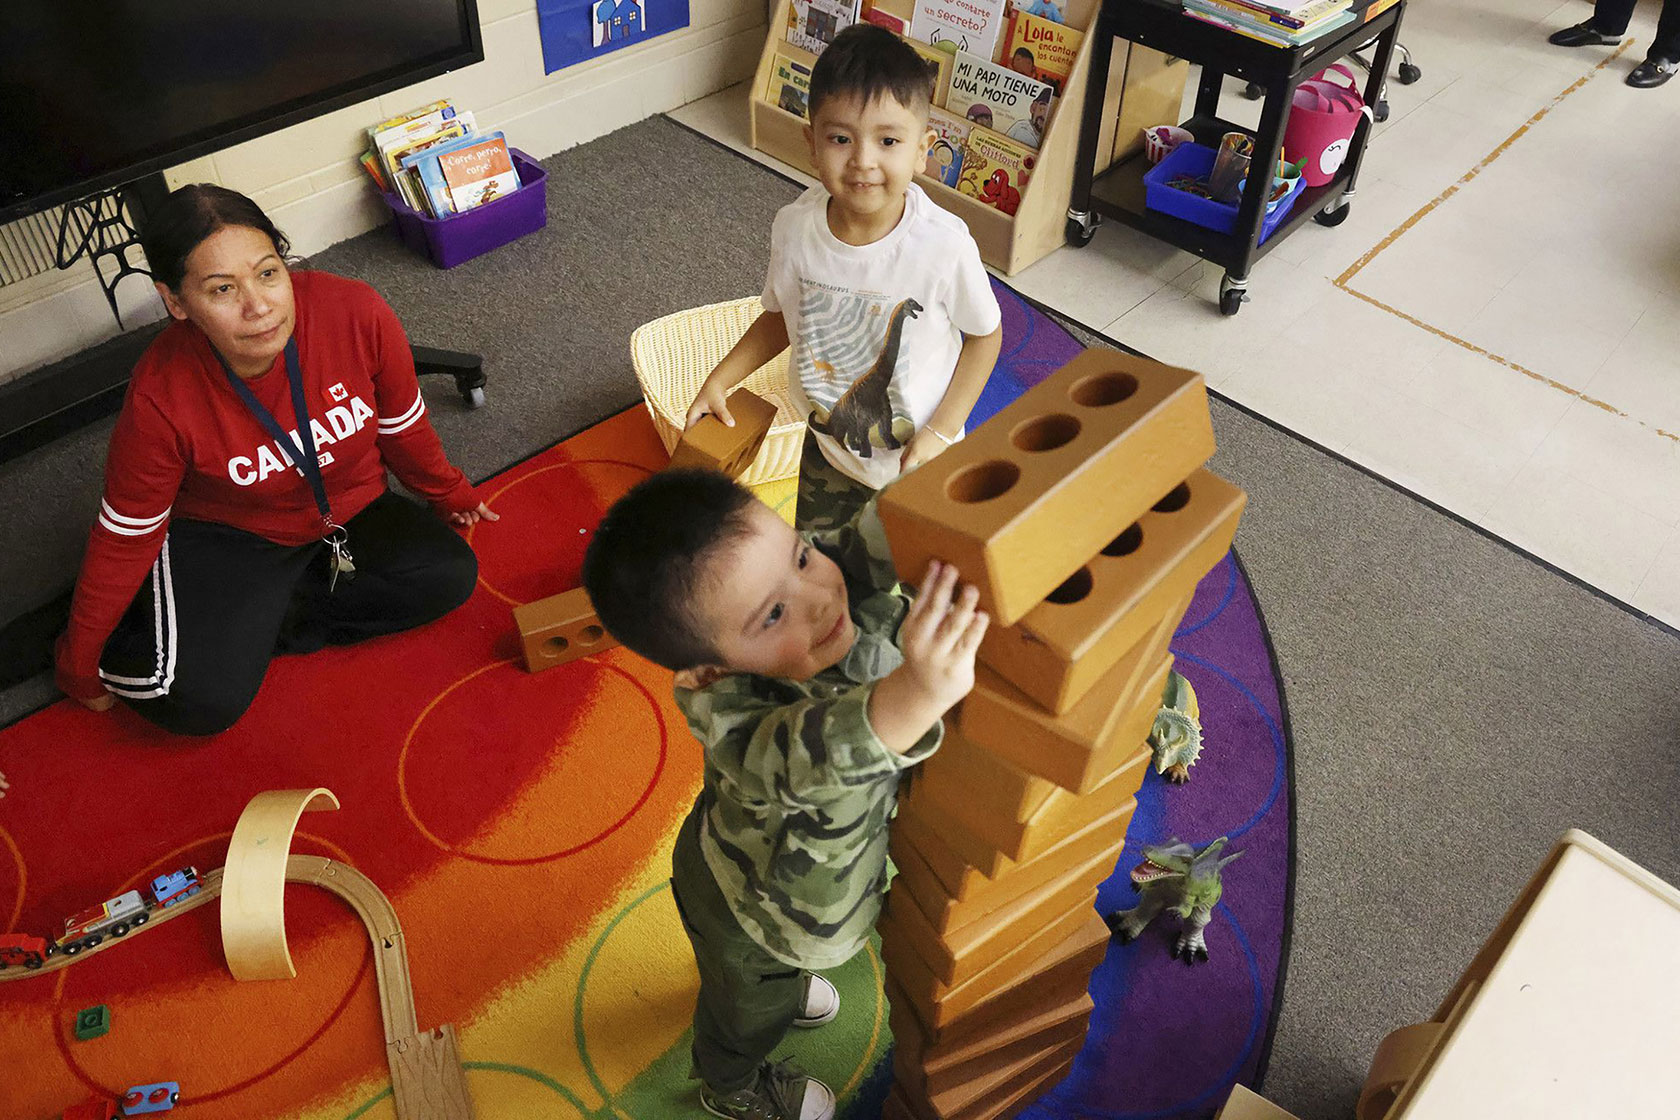 Students at a preschool in Chicago play with blocks as an instructor looks on, January 2023.